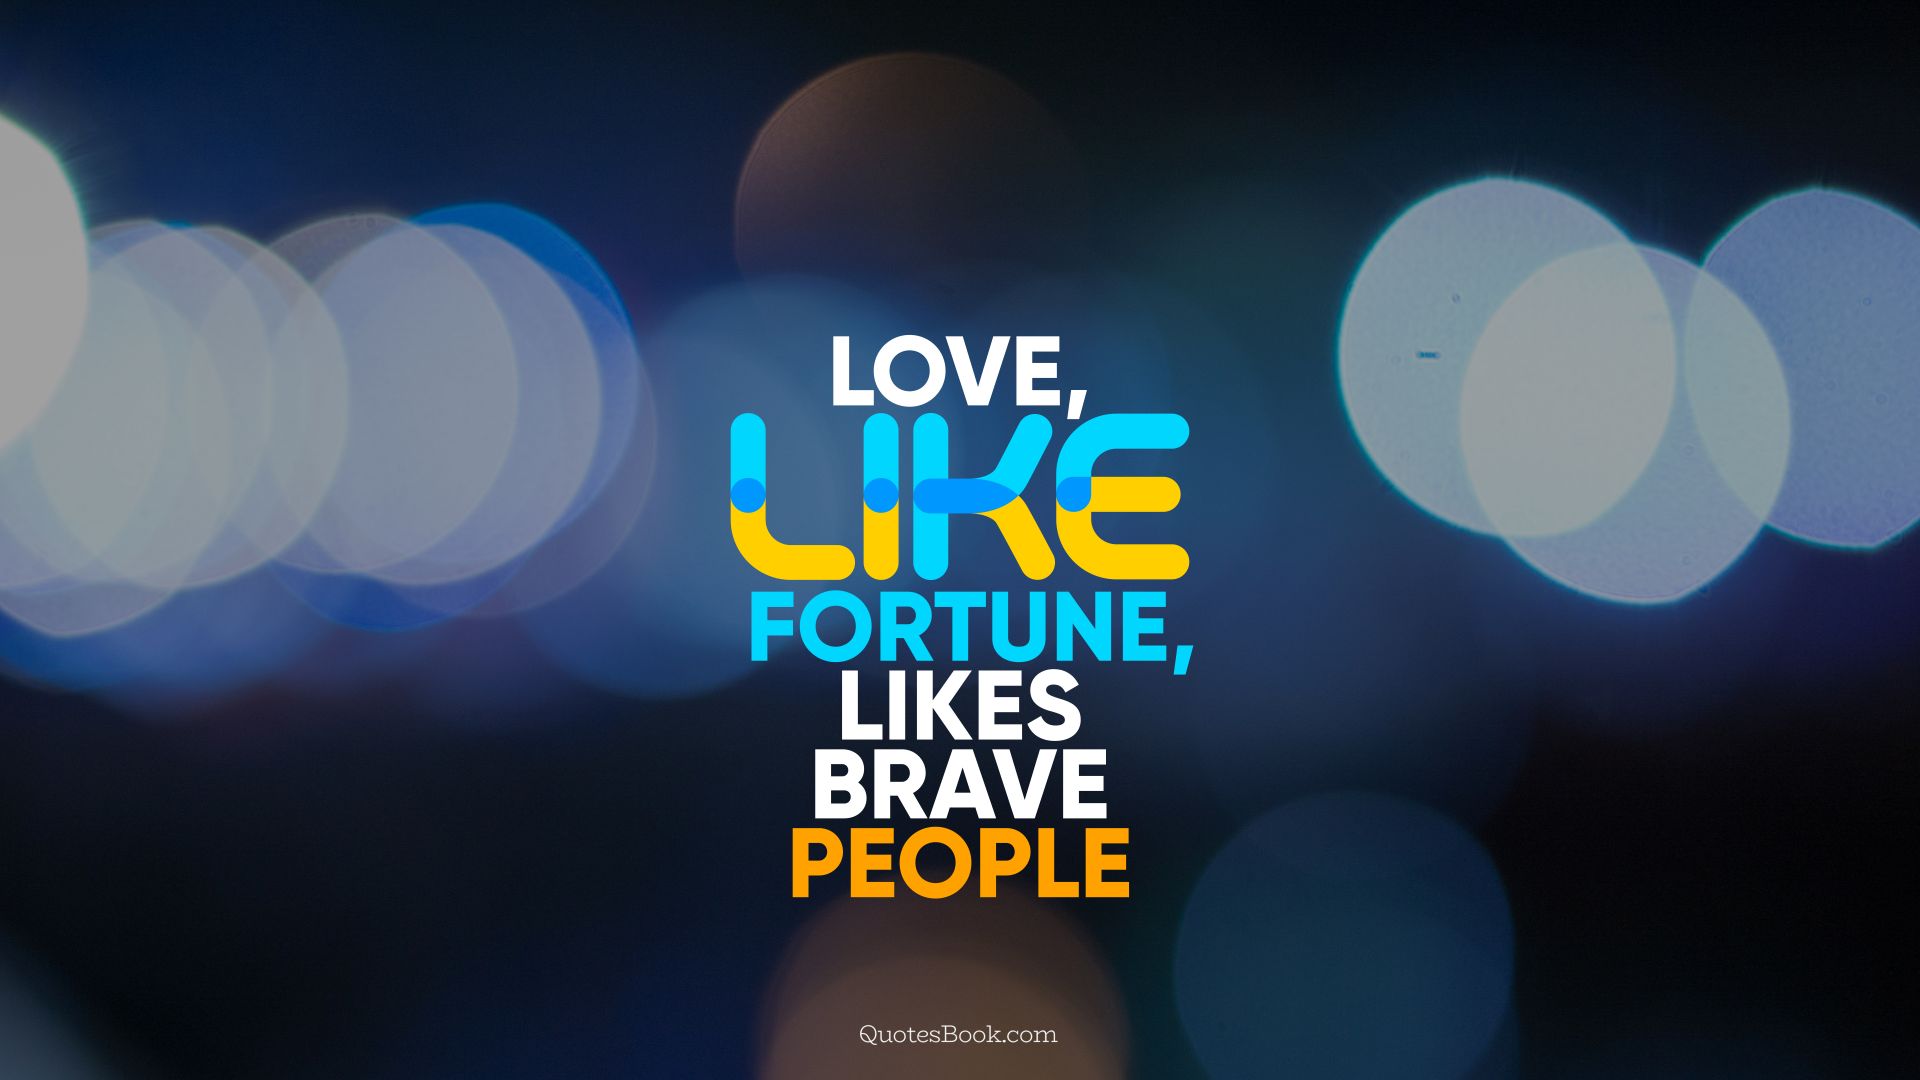 Love, like fortune, likes brave people. - Quote by QuotesBook